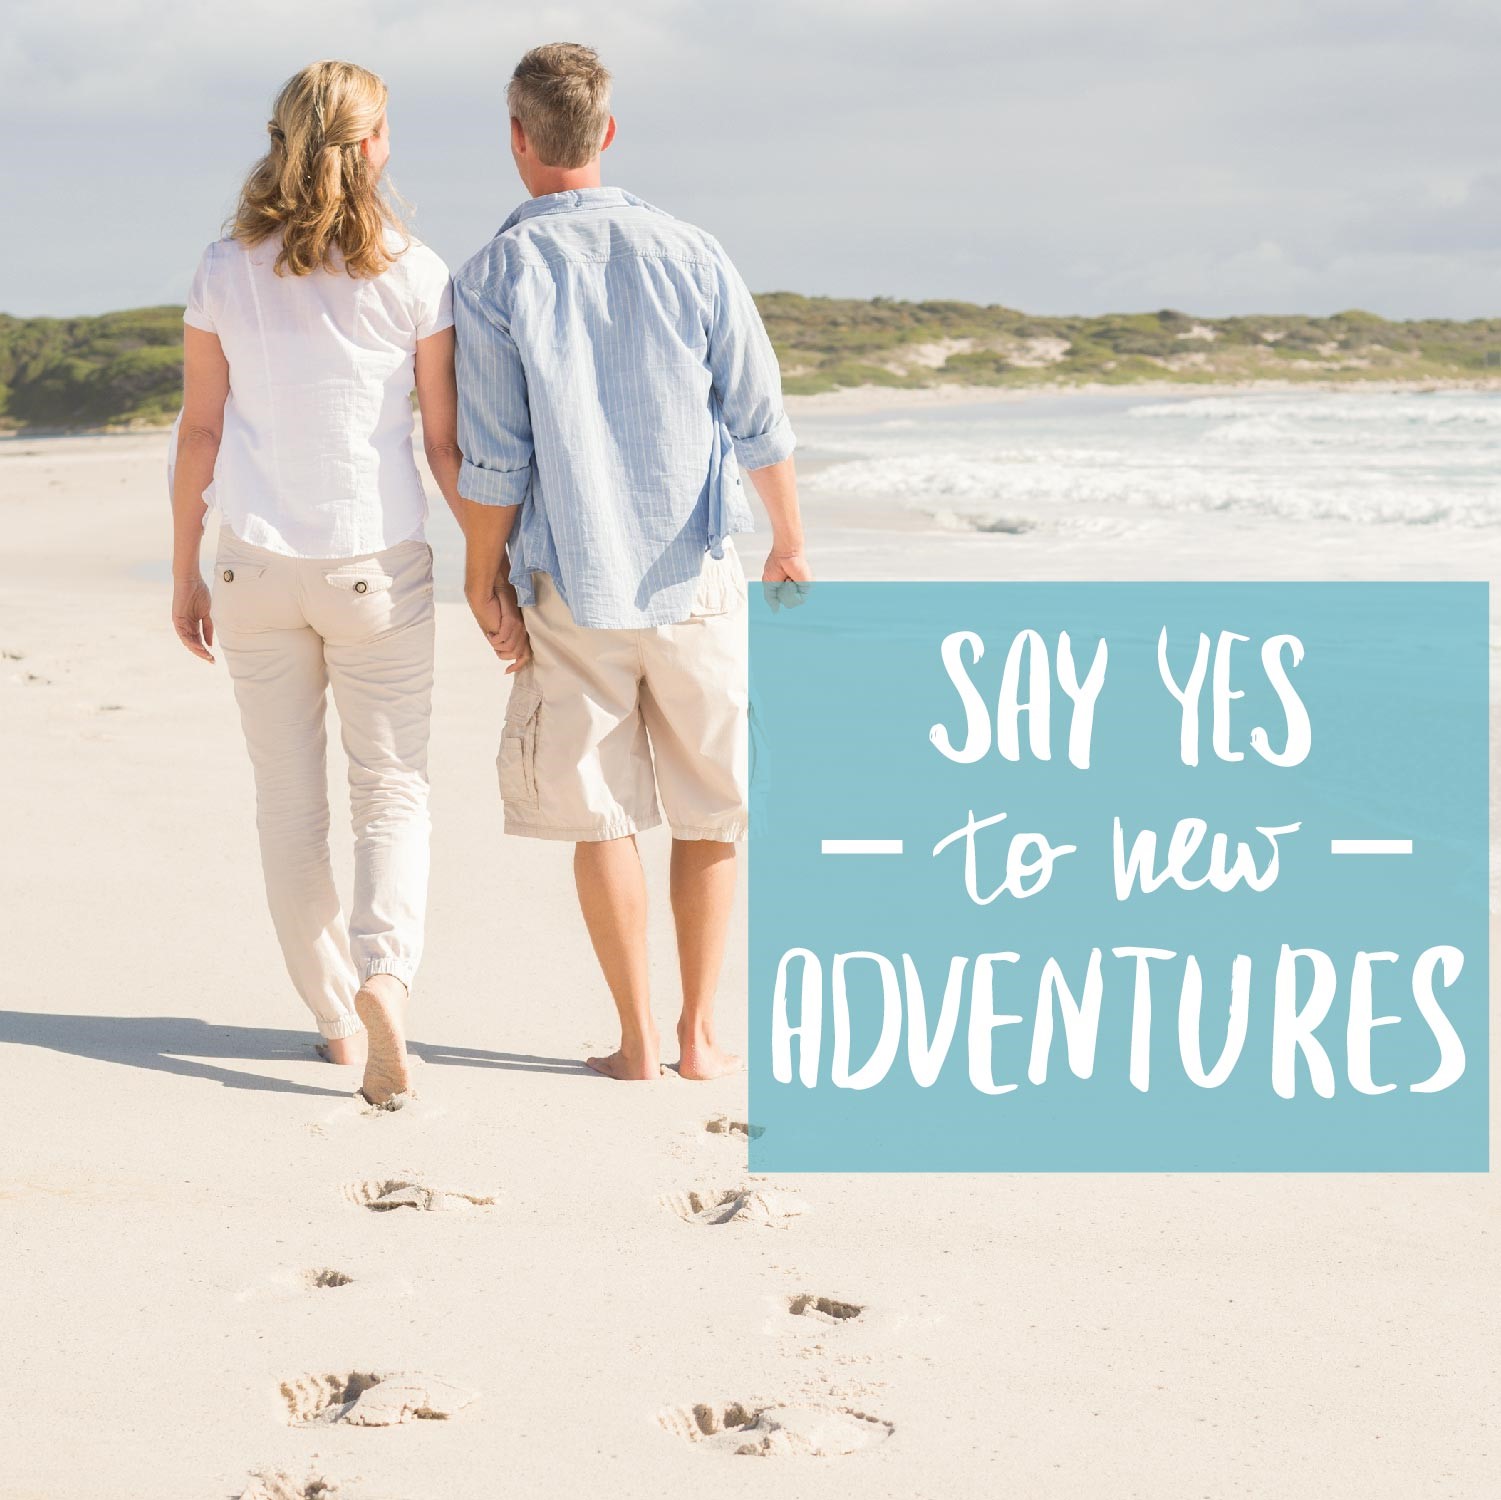 Say YES to new adventures.